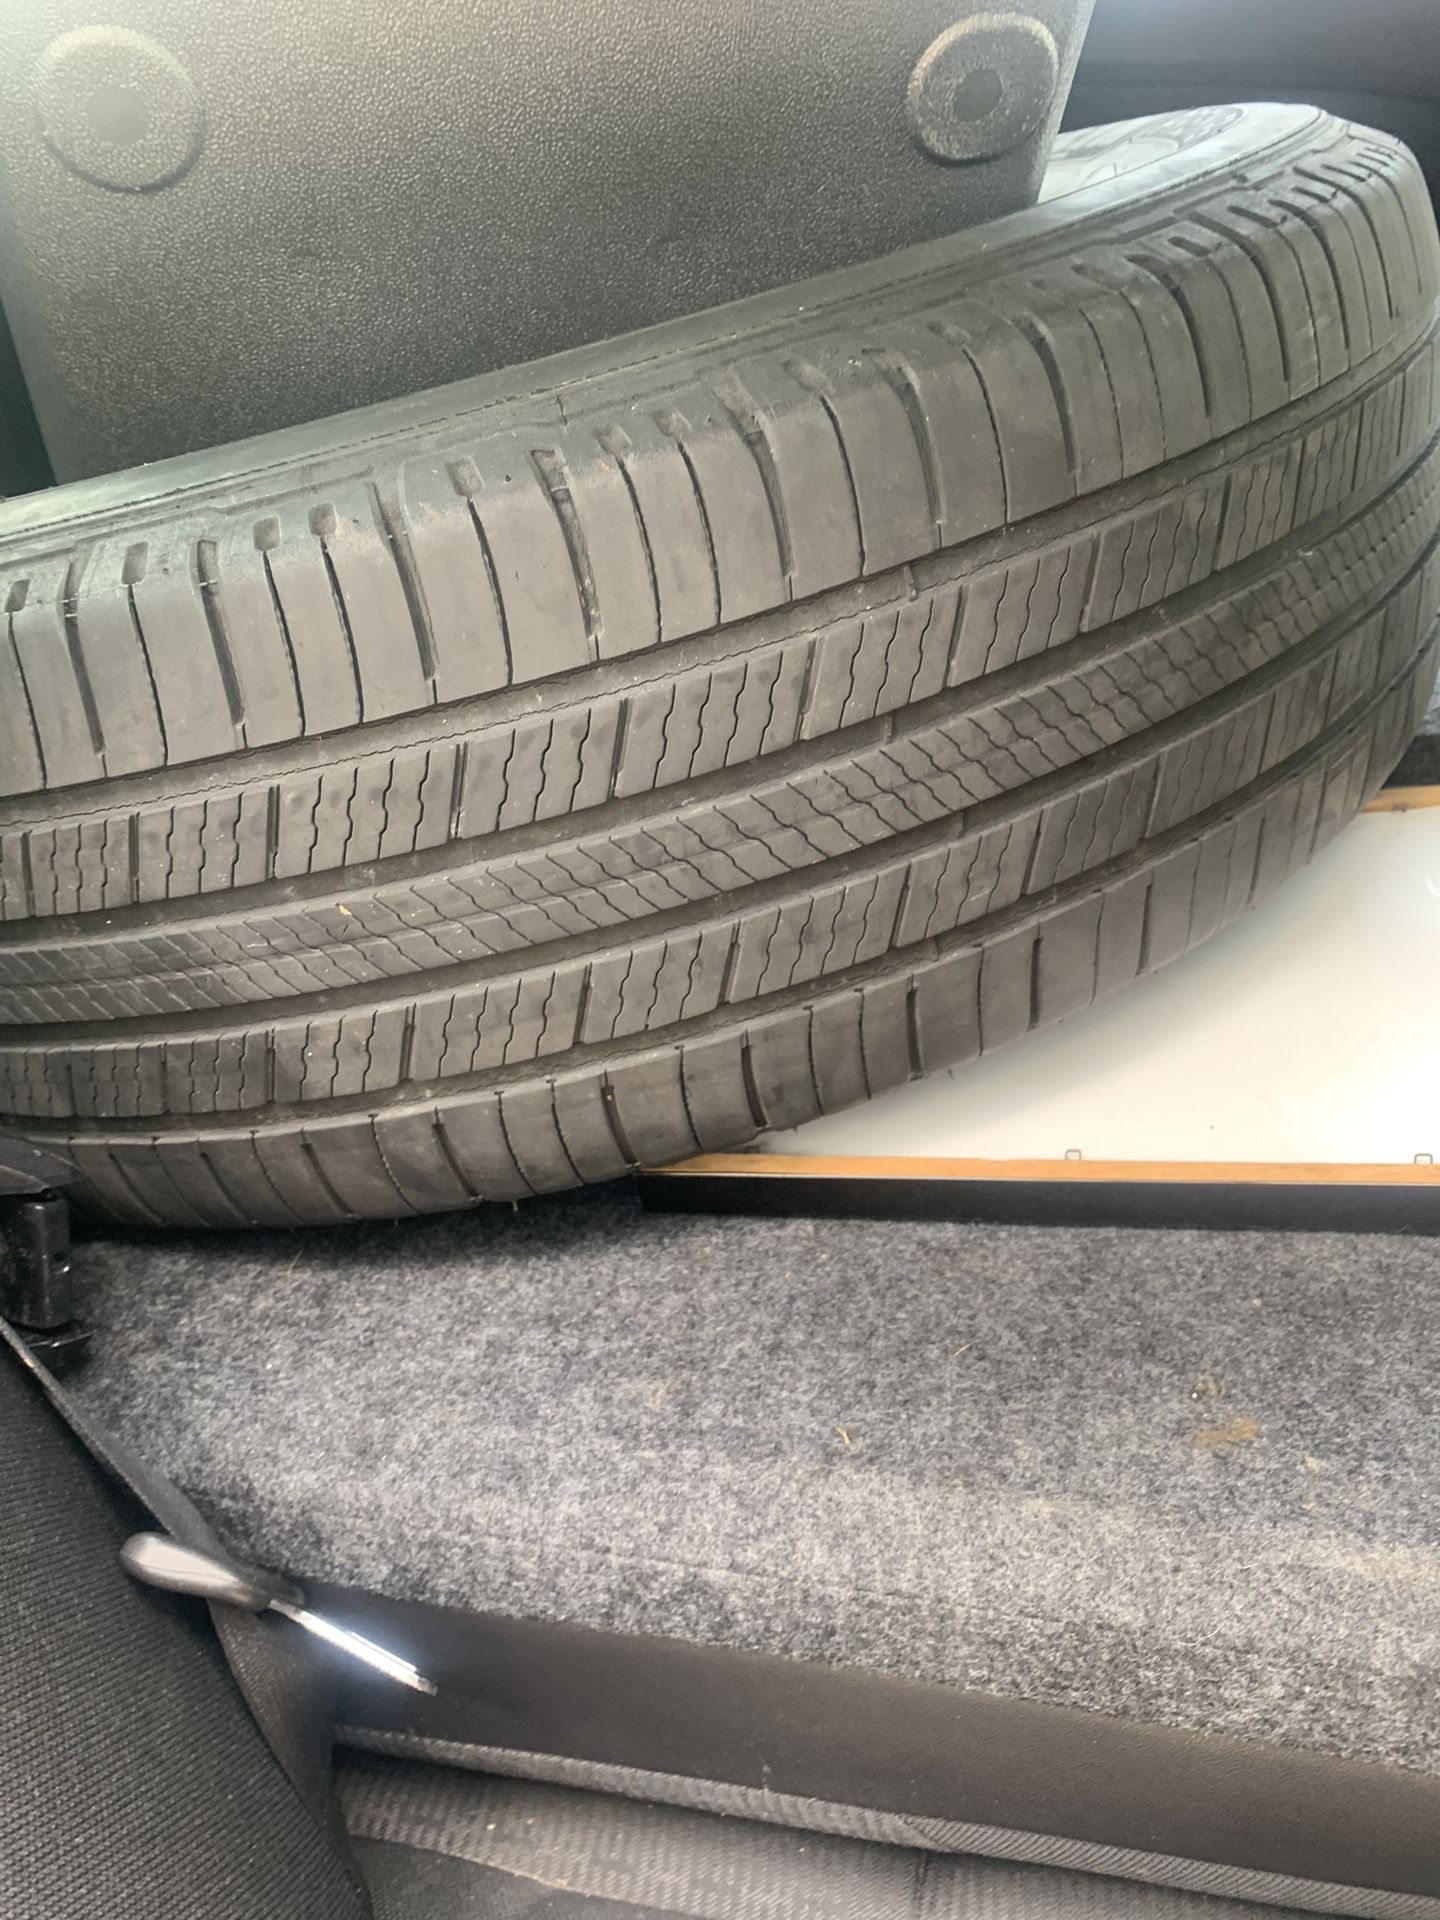 225/65/17 Michelin Set Of 2  For $50